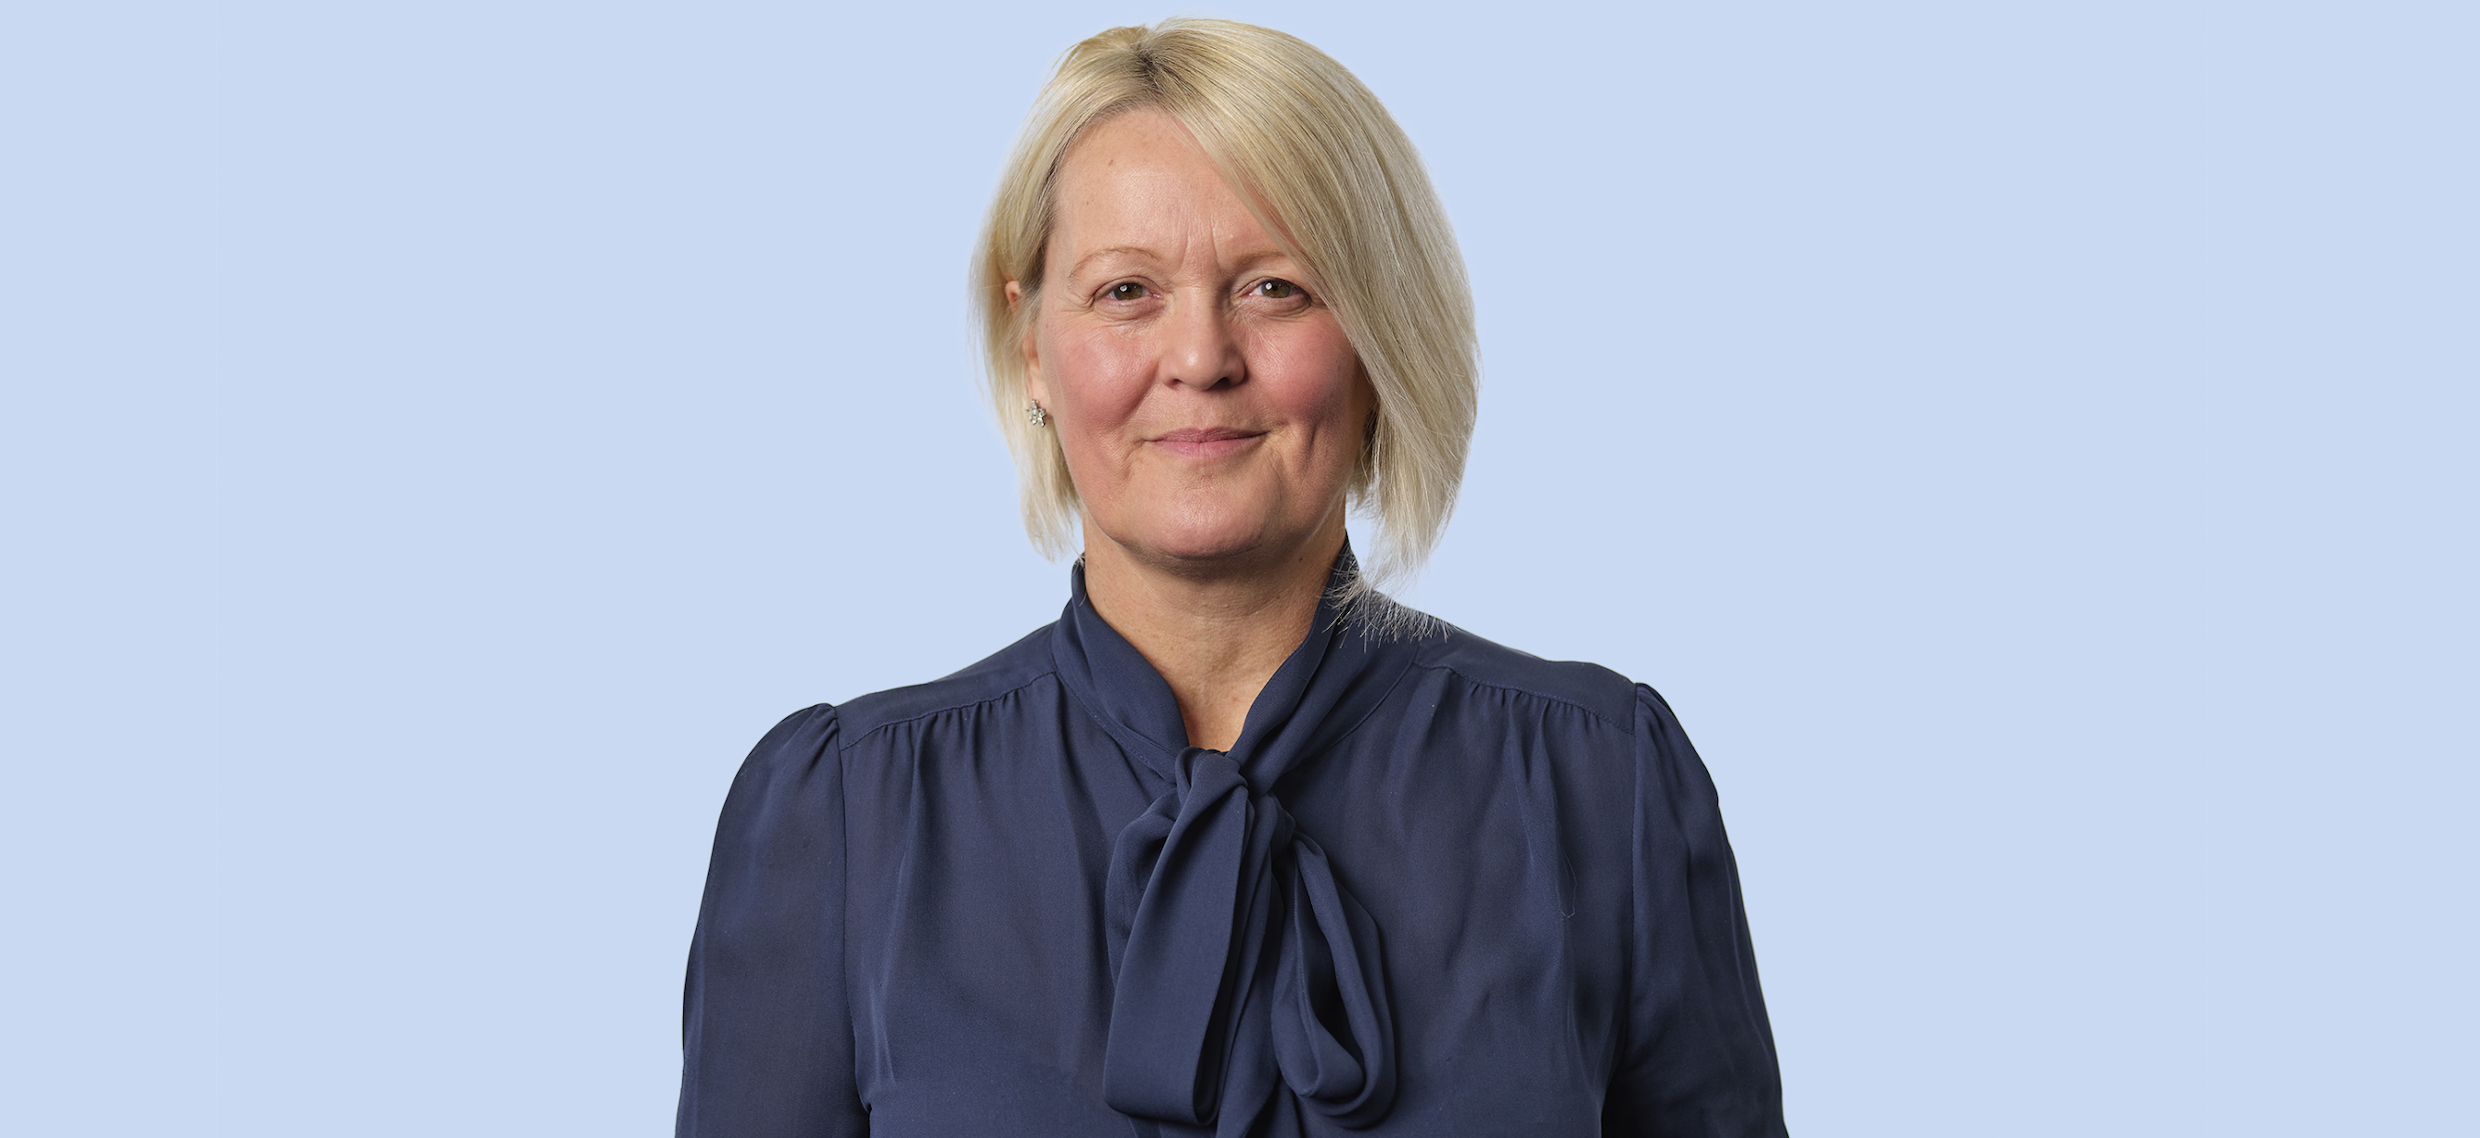 NatWest Group CEO Alison Rose DBE